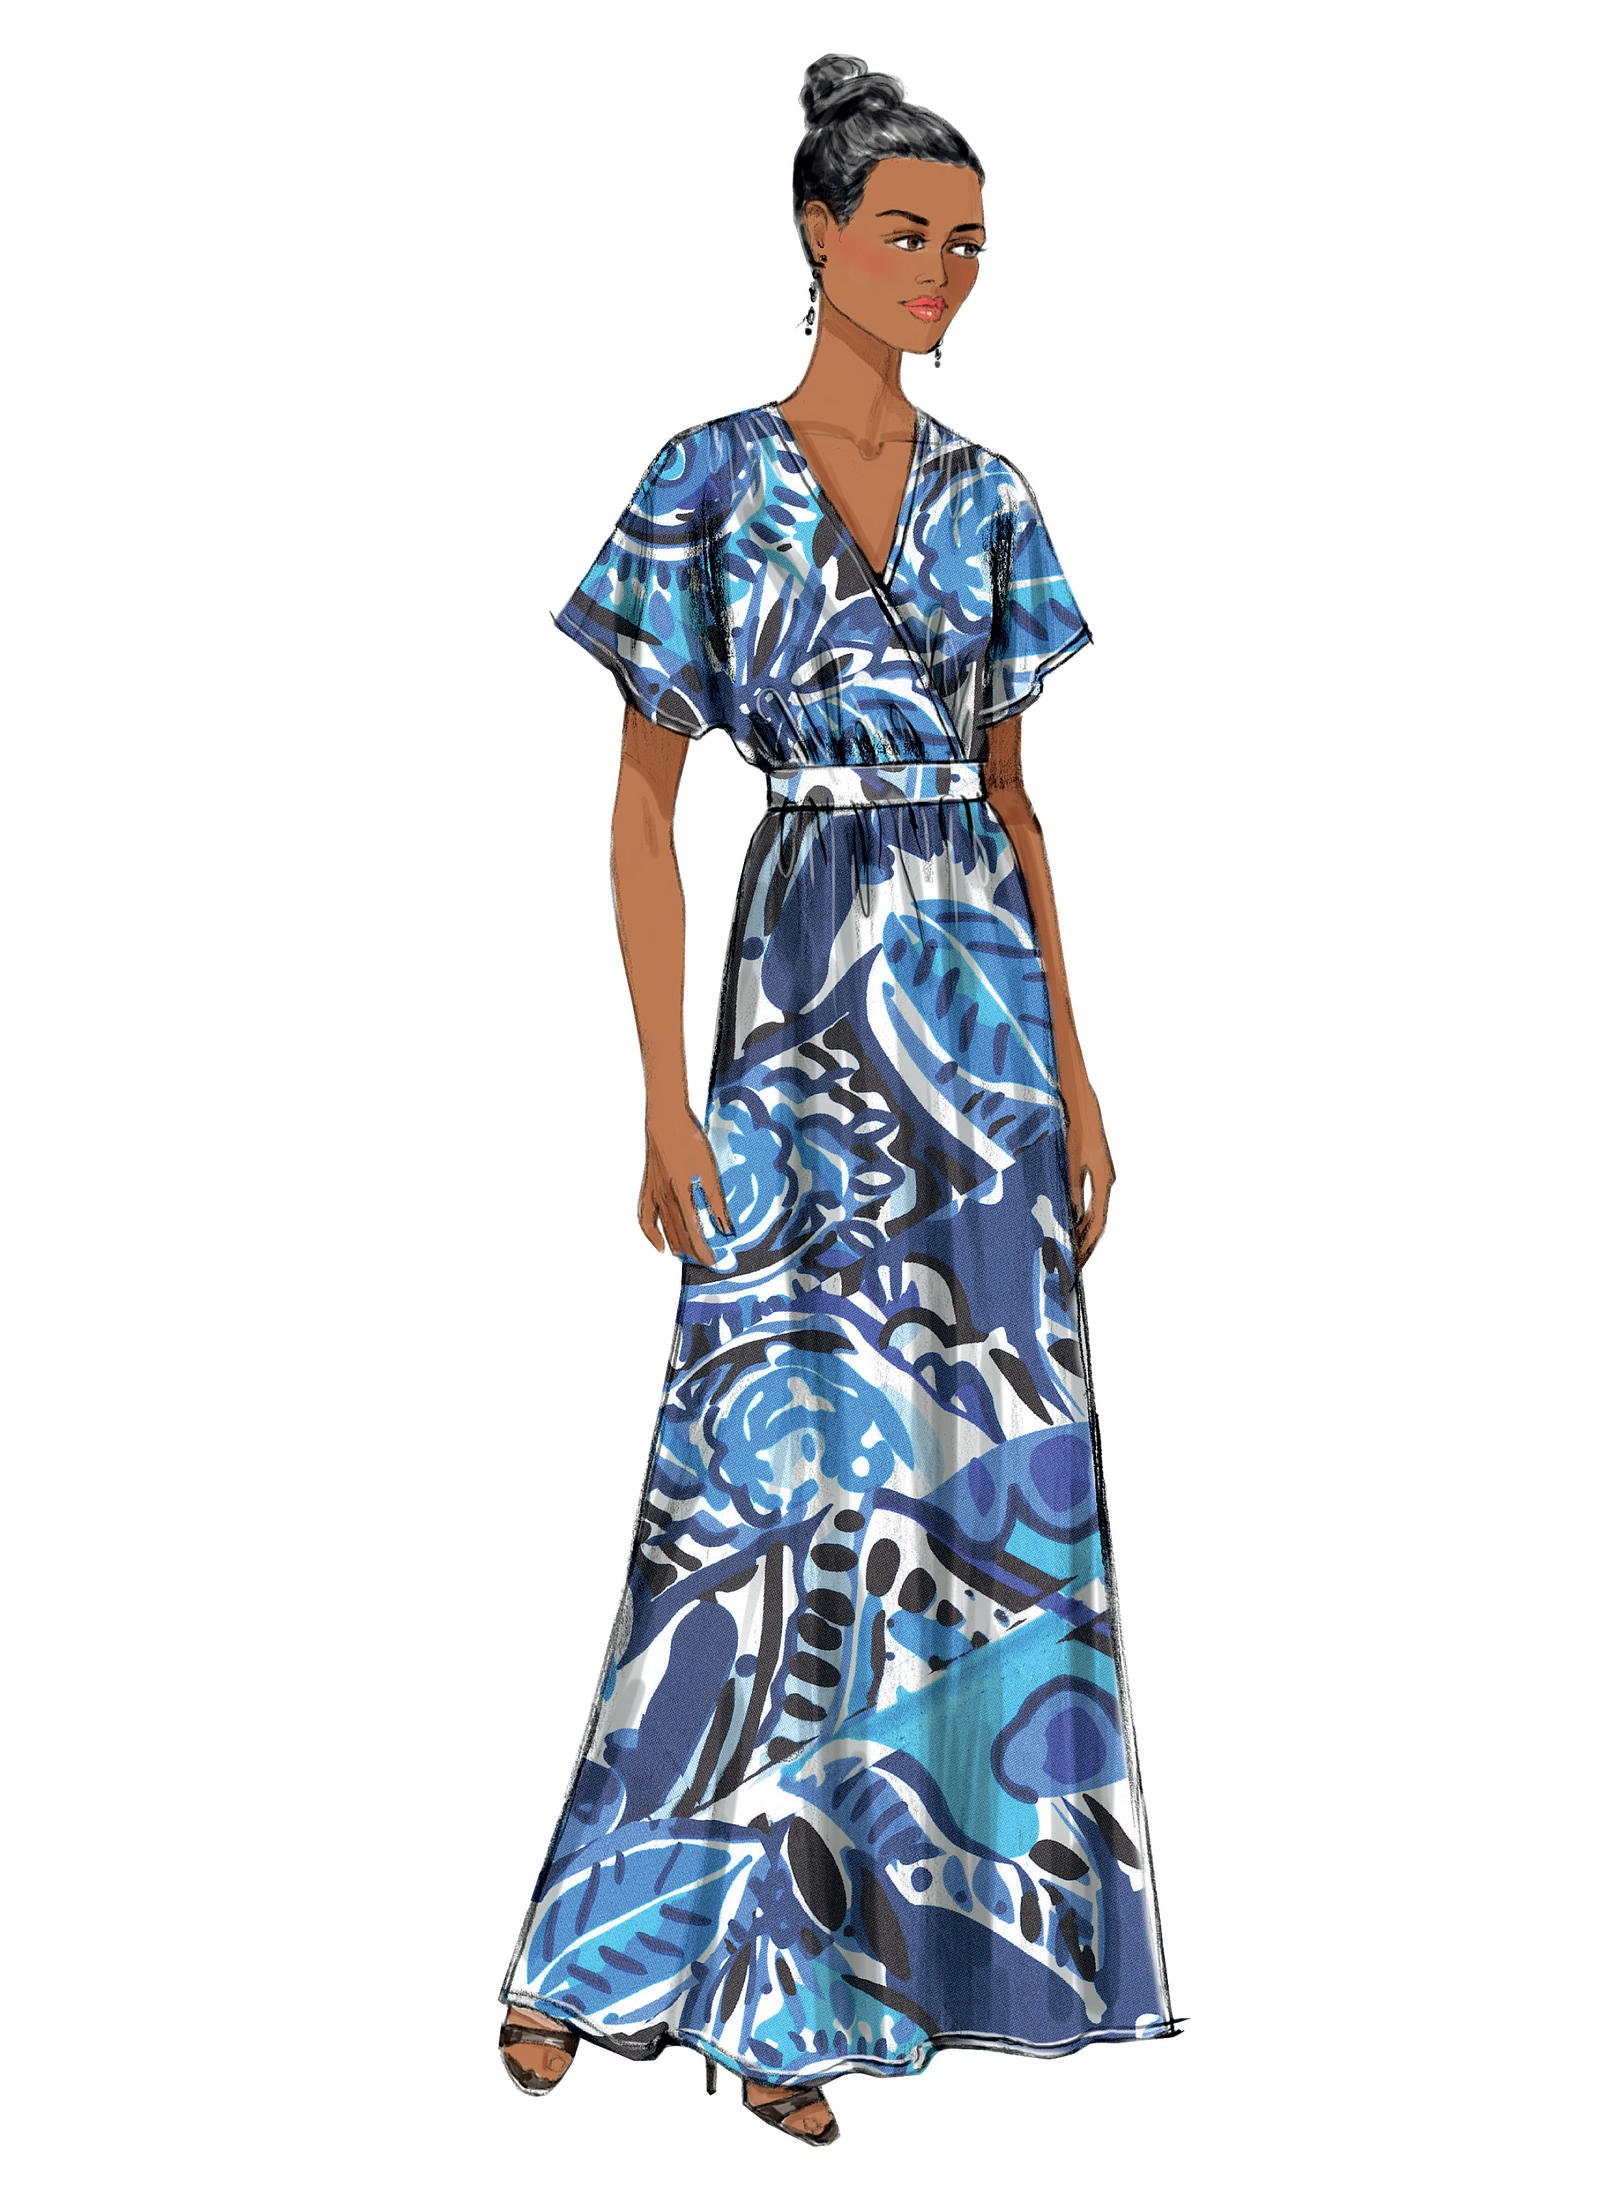 Sewing Pattern Womens Maxi Dress in Misses & Plus Sizes - Etsy